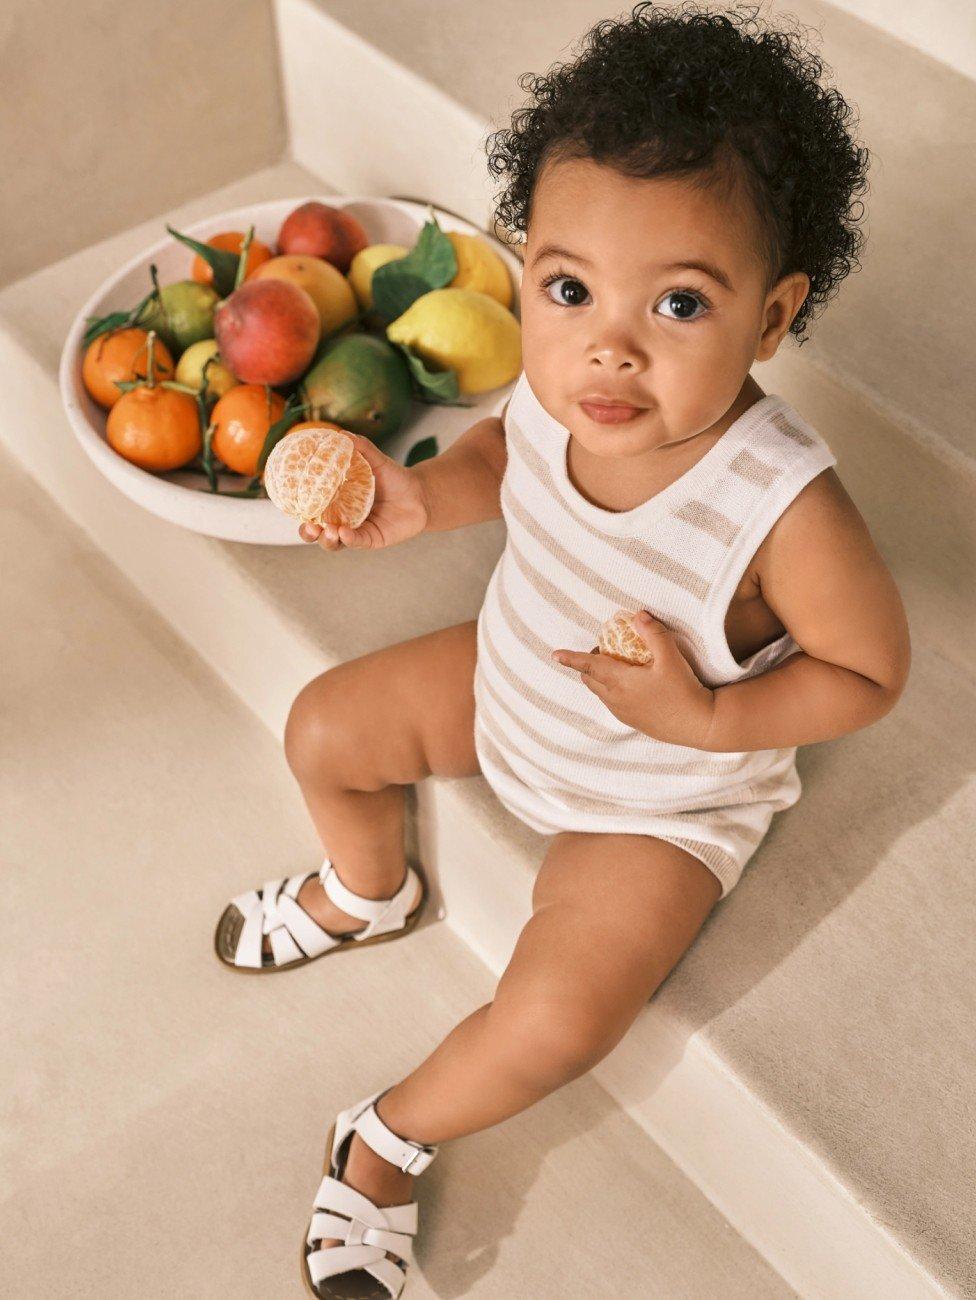 a baby sitting on steps with a bowl of fruit